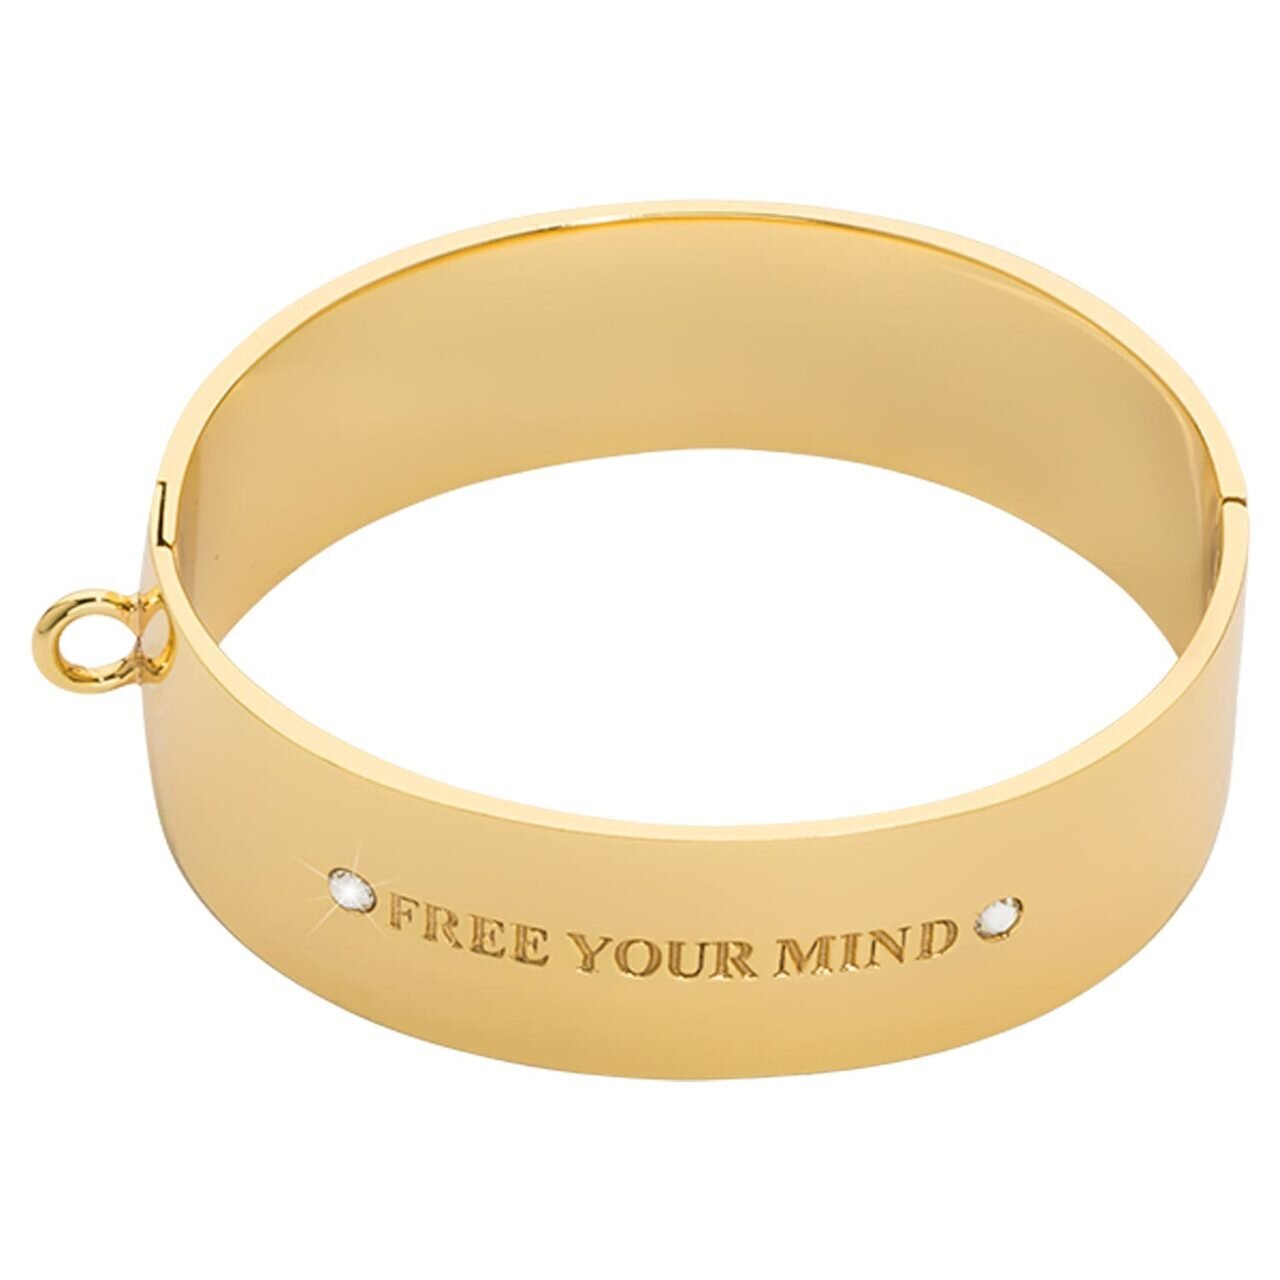 Nikki Lissoni Large Bangle of 2cm with The Engraving Free Your Mind 1 Loop To Attach A Charm Gold-plated 17cm B1145G17